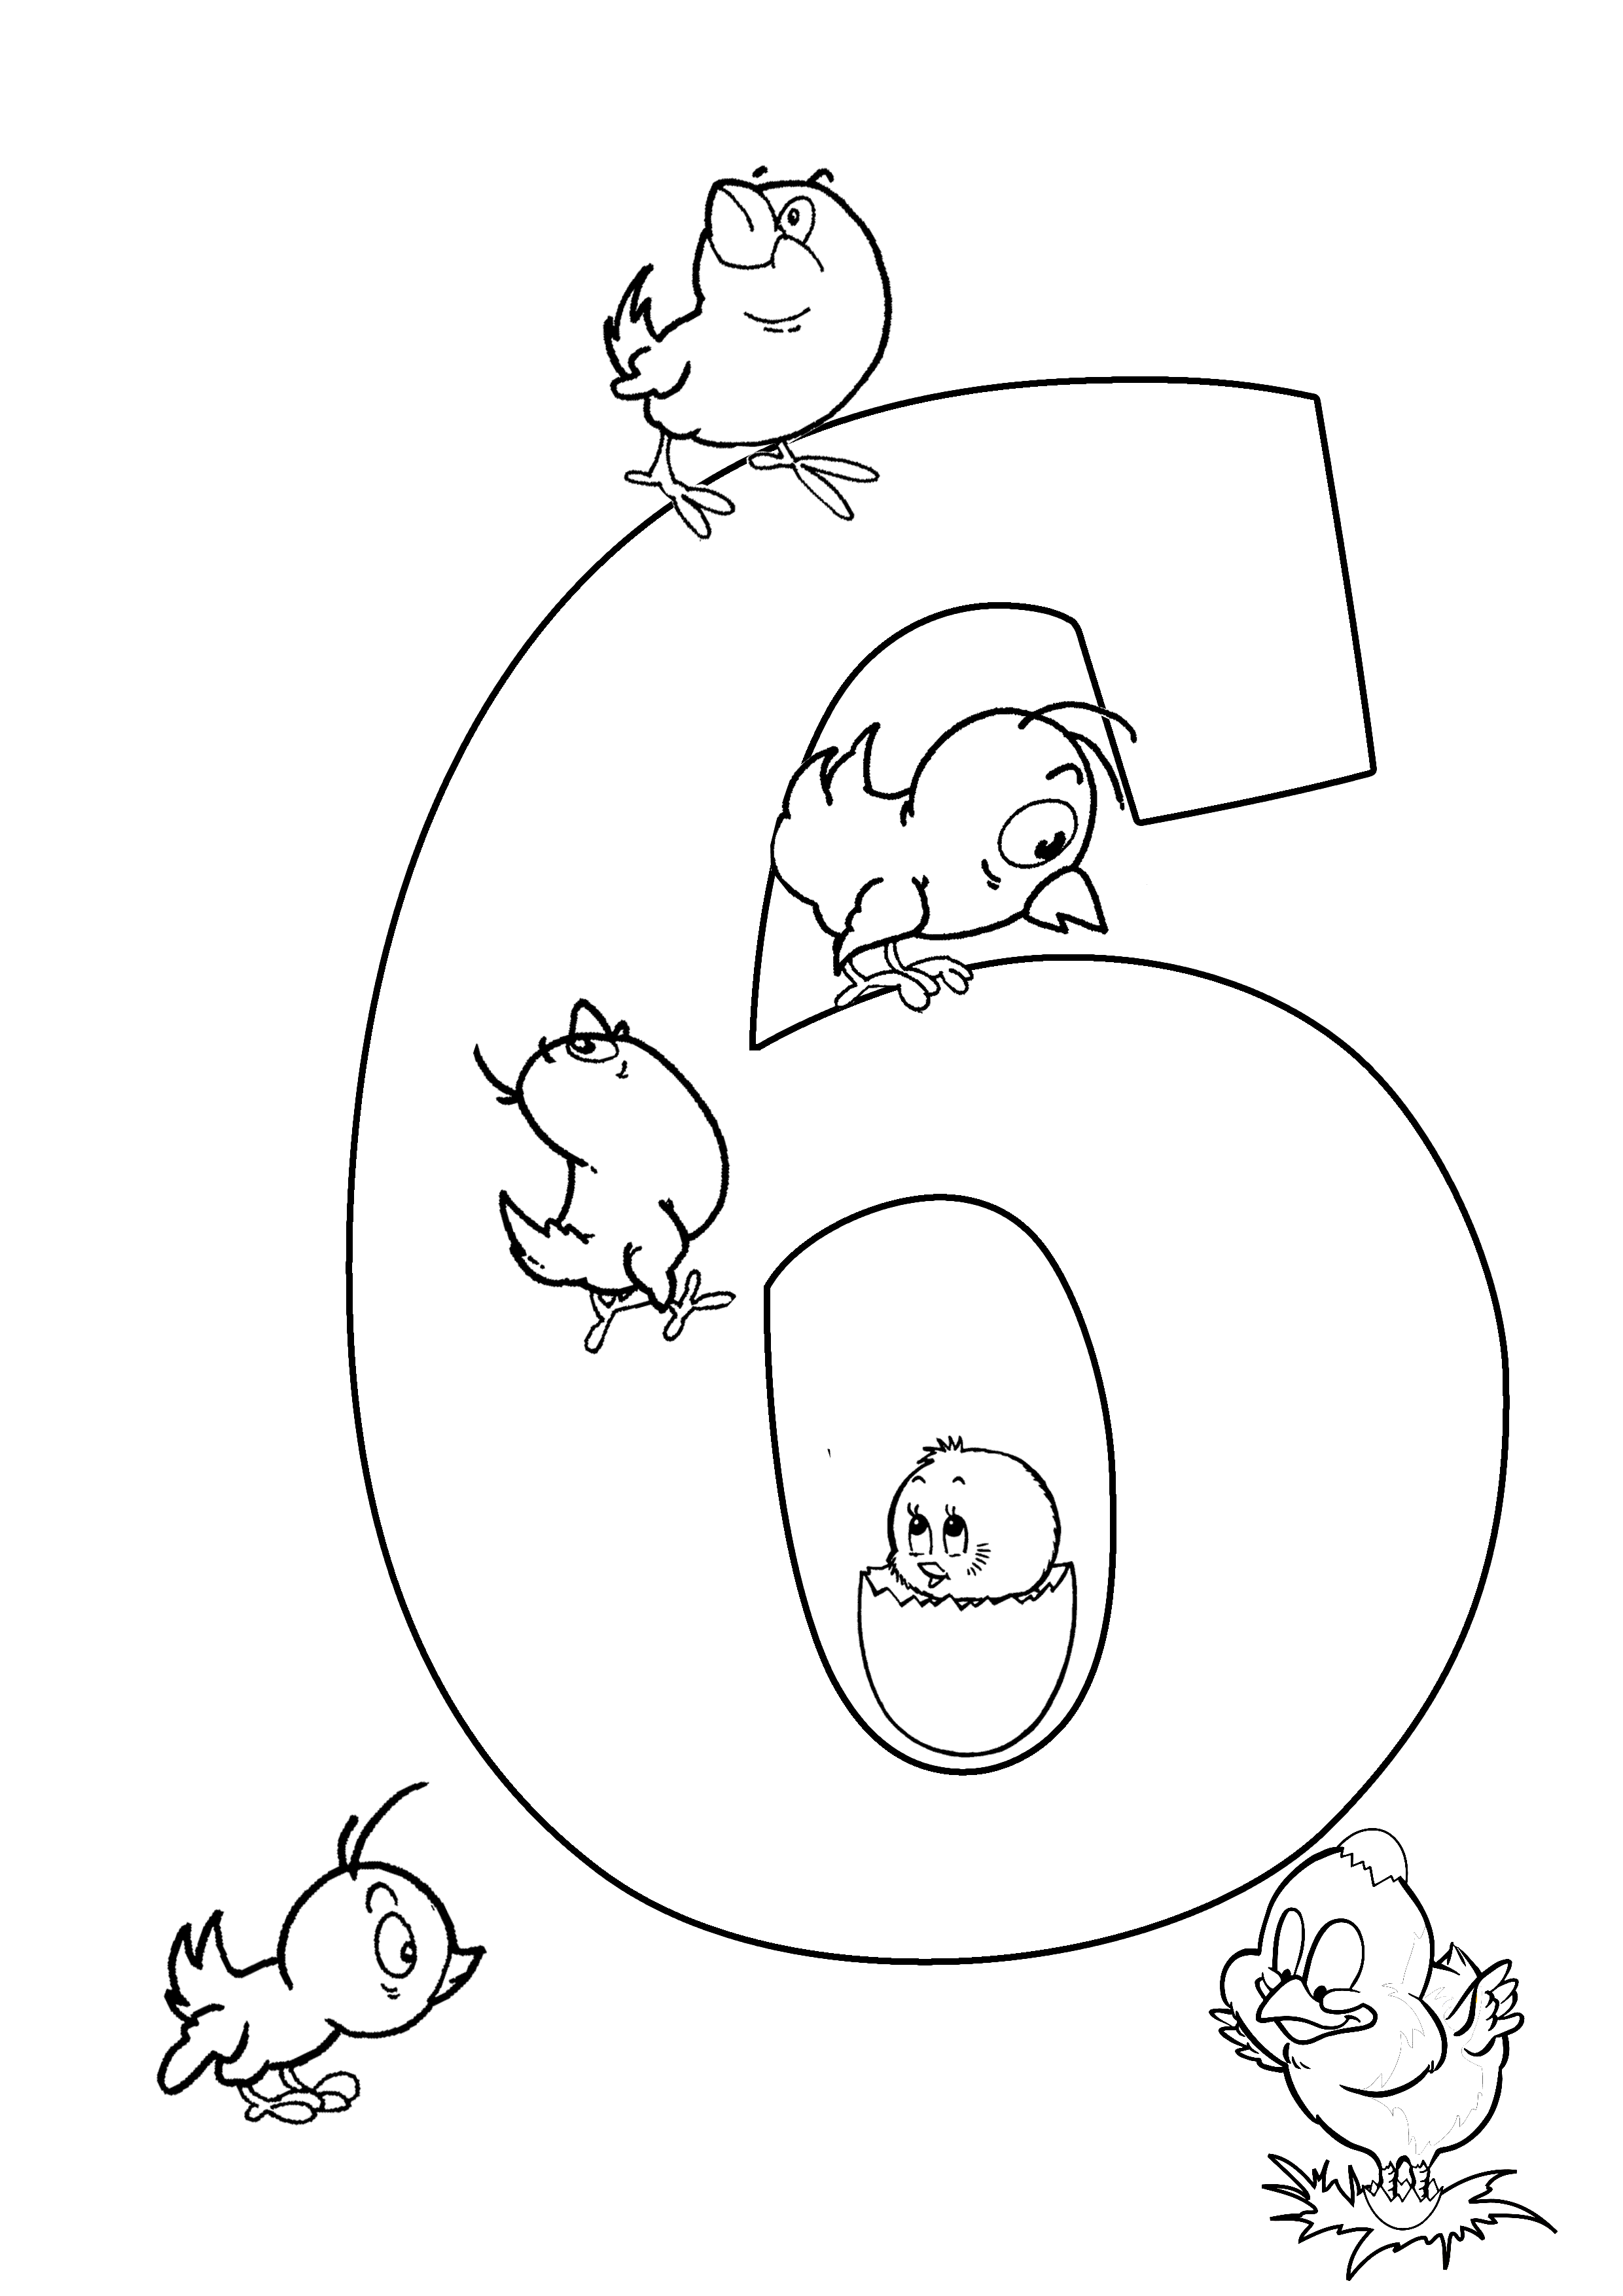 Numbers Coloring Pages for kids printable for free